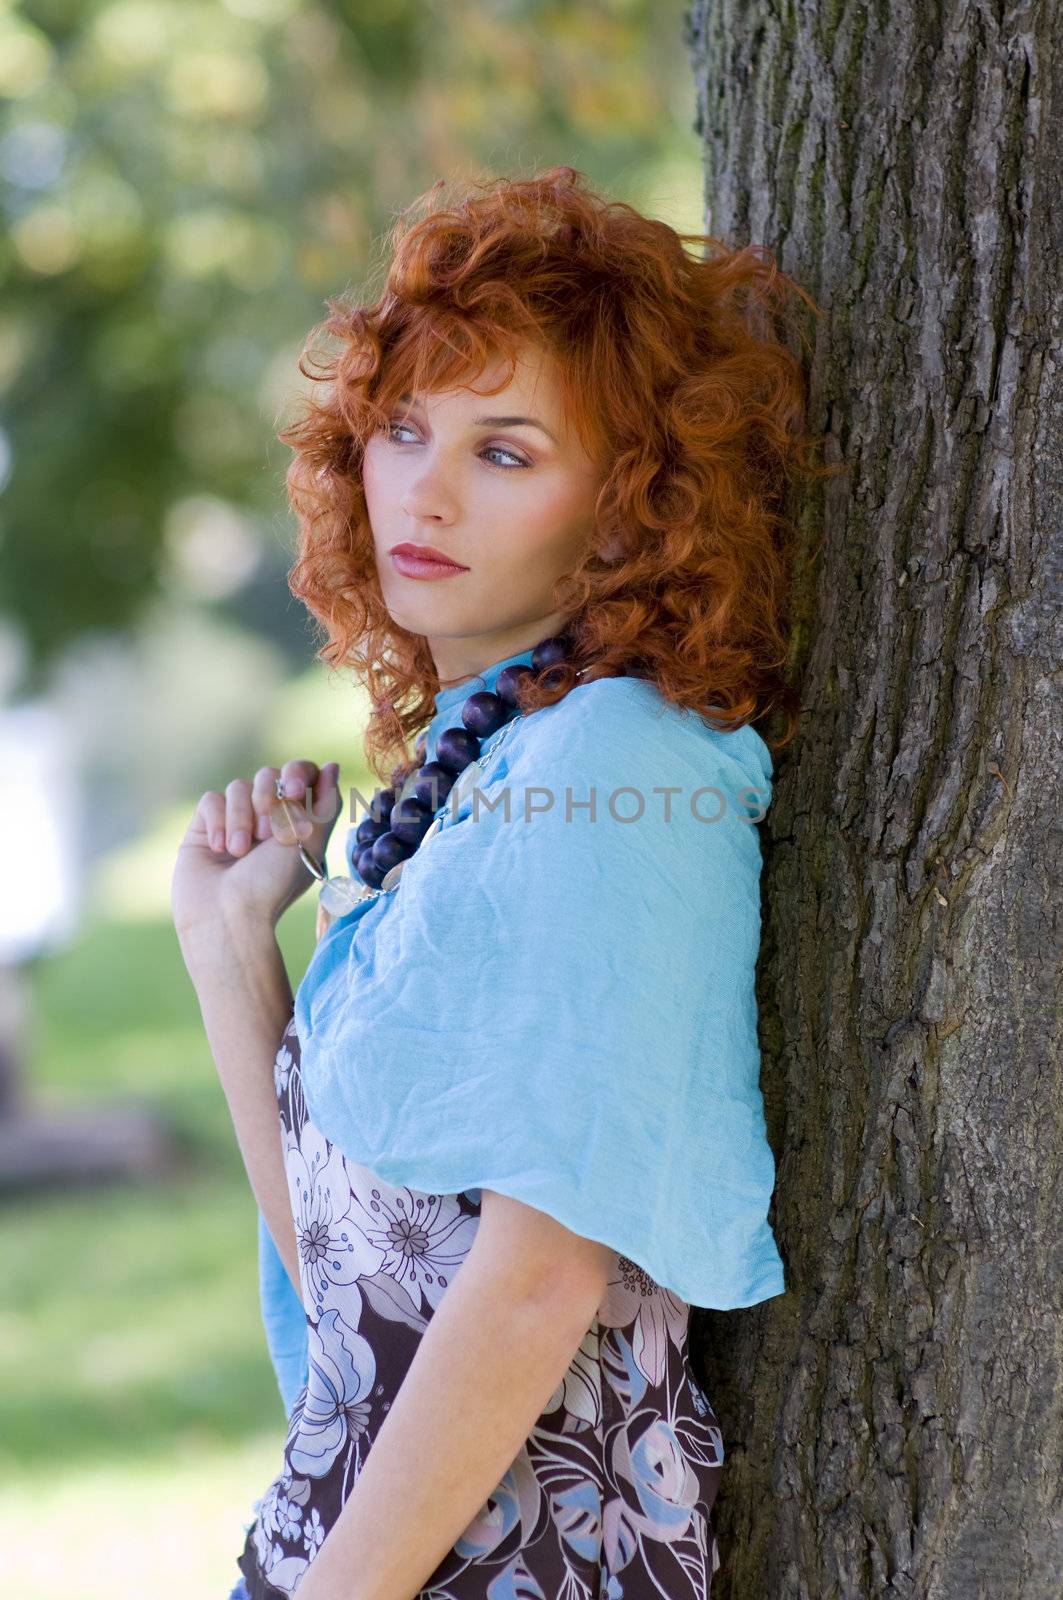 red haired girl in the park standing near the tree with sky-blue scarf